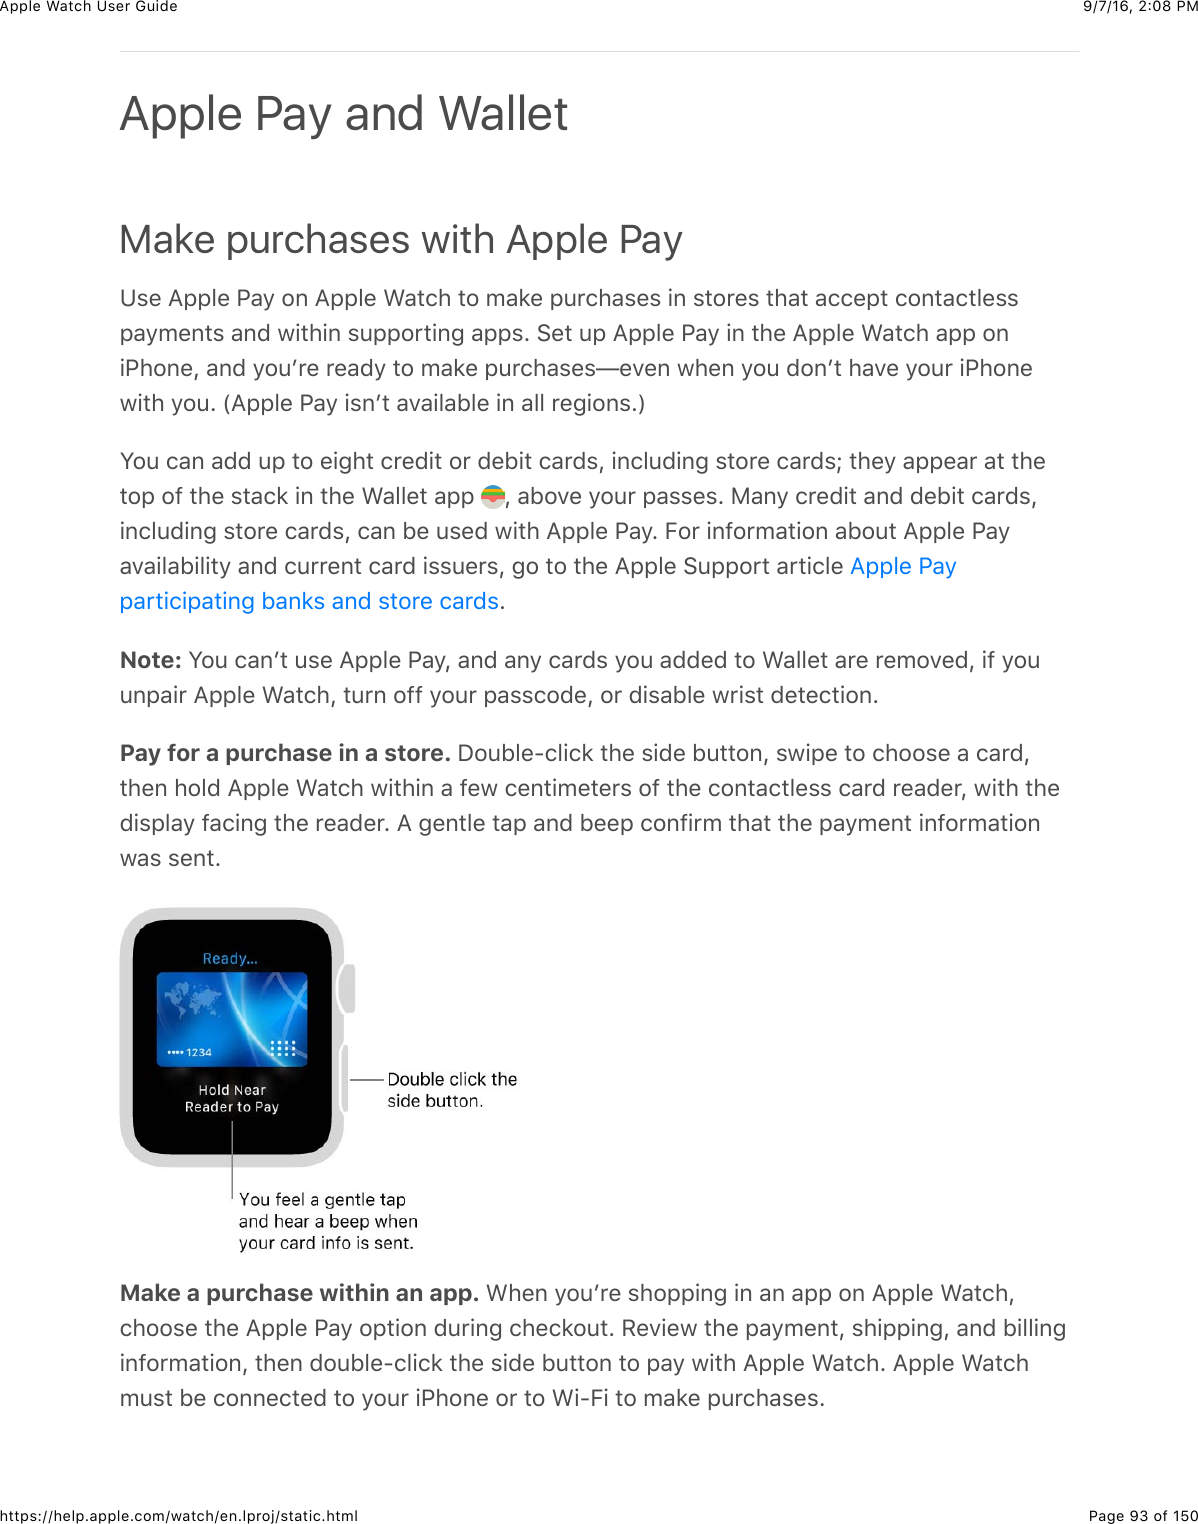 9/7/16, 2)08 PMApple Watch User GuidePage 93 of 150https://help.apple.com/watch/en.lproj/static.htmlMake purchases with Apple PayK$%&amp;=22&quot;%&amp;G&apos;/&amp;#,&amp;=22&quot;%&amp;&gt;&apos;3()&amp;3#&amp;5&apos;8%&amp;24*()&apos;$%$&amp;+,&amp;$3#*%$&amp;3)&apos;3&amp;&apos;((%23&amp;(#,3&apos;(3&quot;%$$2&apos;/5%,3$&amp;&apos;,0&amp;7+3)+,&amp;$422#*3+,-&amp;&apos;22$C&amp;6%3&amp;42&amp;=22&quot;%&amp;G&apos;/&amp;+,&amp;3)%&amp;=22&quot;%&amp;&gt;&apos;3()&amp;&apos;22&amp;#,+G)#,%J&amp;&apos;,0&amp;/#4W*%&amp;*%&apos;0/&amp;3#&amp;5&apos;8%&amp;24*()&apos;$%$T%.%,&amp;7)%,&amp;/#4&amp;0#,W3&amp;)&apos;.%&amp;/#4*&amp;+G)#,%7+3)&amp;/#4C&amp;P=22&quot;%&amp;G&apos;/&amp;+$,W3&amp;&apos;.&apos;+&quot;&apos;B&quot;%&amp;+,&amp;&apos;&quot;&quot;&amp;*%-+#,$CRS#4&amp;(&apos;,&amp;&apos;00&amp;42&amp;3#&amp;%+-)3&amp;(*%0+3&amp;#*&amp;0%B+3&amp;(&apos;*0$J&amp;+,(&quot;40+,-&amp;$3#*%&amp;(&apos;*0$m&amp;3)%/&amp;&apos;22%&apos;*&amp;&apos;3&amp;3)%3#2&amp;#@&amp;3)%&amp;$3&apos;(8&amp;+,&amp;3)%&amp;&gt;&apos;&quot;&quot;%3&amp;&apos;22&amp; J&amp;&apos;B#.%&amp;/#4*&amp;2&apos;$$%$C&amp;F&apos;,/&amp;(*%0+3&amp;&apos;,0&amp;0%B+3&amp;(&apos;*0$J+,(&quot;40+,-&amp;$3#*%&amp;(&apos;*0$J&amp;(&apos;,&amp;B%&amp;4$%0&amp;7+3)&amp;=22&quot;%&amp;G&apos;/C&amp;E#*&amp;+,@#*5&apos;3+#,&amp;&apos;B#43&amp;=22&quot;%&amp;G&apos;/&apos;.&apos;+&quot;&apos;B+&quot;+3/&amp;&apos;,0&amp;(4**%,3&amp;(&apos;*0&amp;+$$4%*$J&amp;-#&amp;3#&amp;3)%&amp;=22&quot;%&amp;6422#*3&amp;&apos;*3+(&quot;%&amp;CNote: S#4&amp;(&apos;,W3&amp;4$%&amp;=22&quot;%&amp;G&apos;/J&amp;&apos;,0&amp;&apos;,/&amp;(&apos;*0$&amp;/#4&amp;&apos;00%0&amp;3#&amp;&gt;&apos;&quot;&quot;%3&amp;&apos;*%&amp;*%5#.%0J&amp;+@&amp;/#44,2&apos;+*&amp;=22&quot;%&amp;&gt;&apos;3()J&amp;34*,&amp;#@@&amp;/#4*&amp;2&apos;$$(#0%J&amp;#*&amp;0+$&apos;B&quot;%&amp;7*+$3&amp;0%3%(3+#,CPay for a purchase in a store. I#4B&quot;%?(&quot;+(8&amp;3)%&amp;$+0%&amp;B433#,J&amp;$7+2%&amp;3#&amp;()##$%&amp;&apos;&amp;(&apos;*0J3)%,&amp;)#&quot;0&amp;=22&quot;%&amp;&gt;&apos;3()&amp;7+3)+,&amp;&apos;&amp;@%7&amp;(%,3+5%3%*$&amp;#@&amp;3)%&amp;(#,3&apos;(3&quot;%$$&amp;(&apos;*0&amp;*%&apos;0%*J&amp;7+3)&amp;3)%0+$2&quot;&apos;/&amp;@&apos;(+,-&amp;3)%&amp;*%&apos;0%*C&amp;=&amp;-%,3&quot;%&amp;3&apos;2&amp;&apos;,0&amp;B%%2&amp;(#,@+*5&amp;3)&apos;3&amp;3)%&amp;2&apos;/5%,3&amp;+,@#*5&apos;3+#,7&apos;$&amp;$%,3CMake a purchase within an app. &gt;)%,&amp;/#4W*%&amp;$)#22+,-&amp;+,&amp;&apos;,&amp;&apos;22&amp;#,&amp;=22&quot;%&amp;&gt;&apos;3()J()##$%&amp;3)%&amp;=22&quot;%&amp;G&apos;/&amp;#23+#,&amp;04*+,-&amp;()%(8#43C&amp;H%.+%7&amp;3)%&amp;2&apos;/5%,3J&amp;$)+22+,-J&amp;&apos;,0&amp;B+&quot;&quot;+,-+,@#*5&apos;3+#,J&amp;3)%,&amp;0#4B&quot;%?(&quot;+(8&amp;3)%&amp;$+0%&amp;B433#,&amp;3#&amp;2&apos;/&amp;7+3)&amp;=22&quot;%&amp;&gt;&apos;3()C&amp;=22&quot;%&amp;&gt;&apos;3()54$3&amp;B%&amp;(#,,%(3%0&amp;3#&amp;/#4*&amp;+G)#,%&amp;#*&amp;3#&amp;&gt;+?E+&amp;3#&amp;5&apos;8%&amp;24*()&apos;$%$CApple Pay and Wallet=22&quot;%&amp;G&apos;/2&apos;*3+(+2&apos;3+,-&amp;B&apos;,8$&amp;&apos;,0&amp;$3#*%&amp;(&apos;*0$